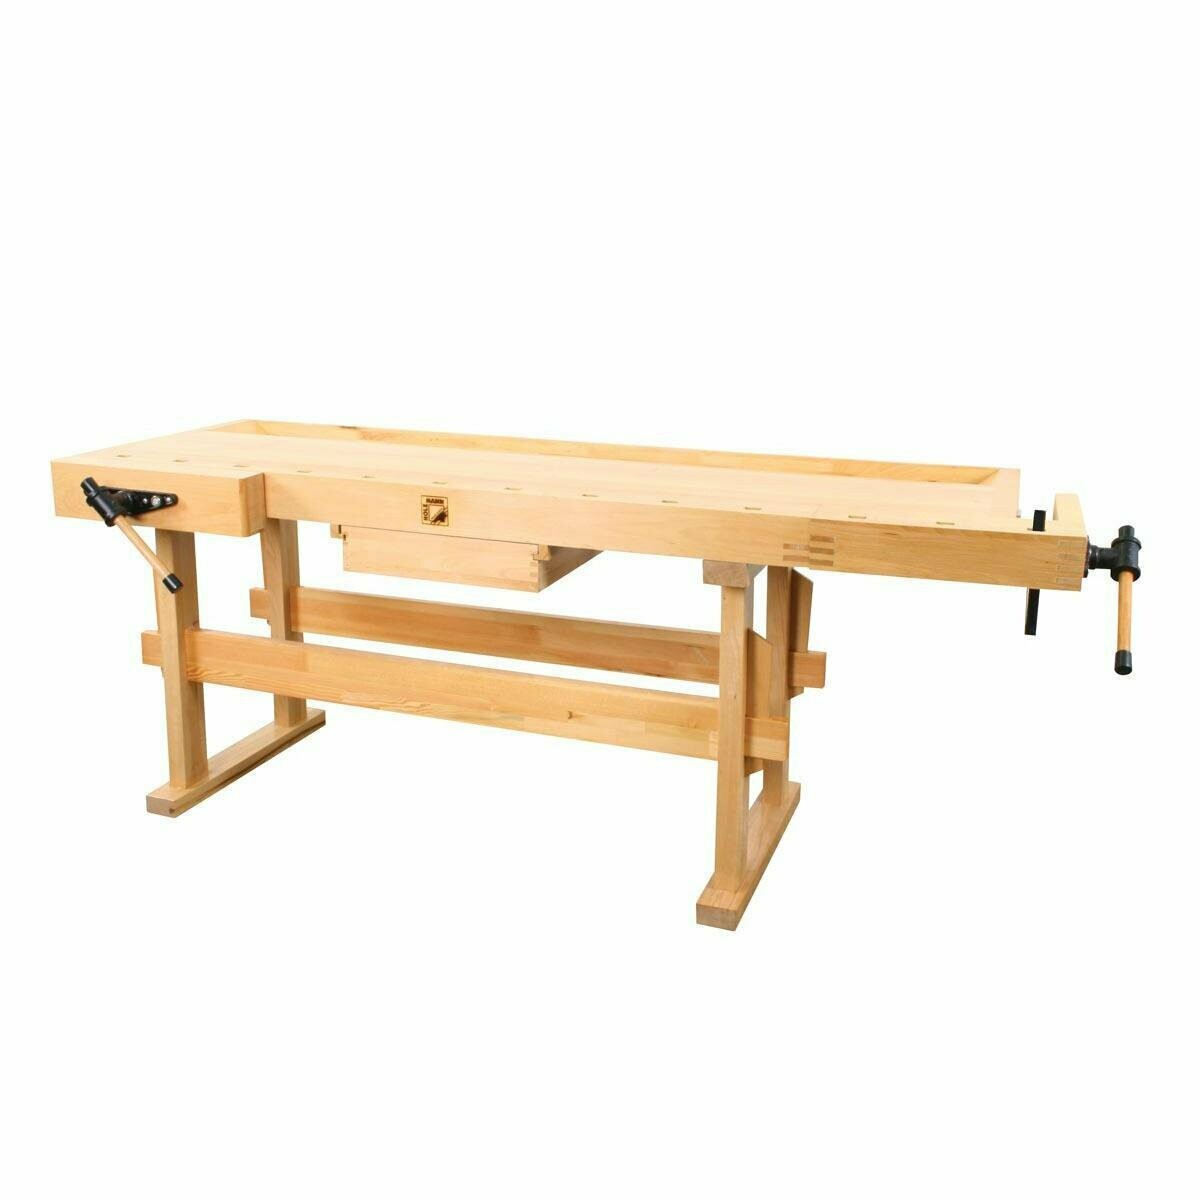 Holzmann WB210 Work Bench With Drawer & Clamping Jaws
( Available with free of charge UK mainland delivery)